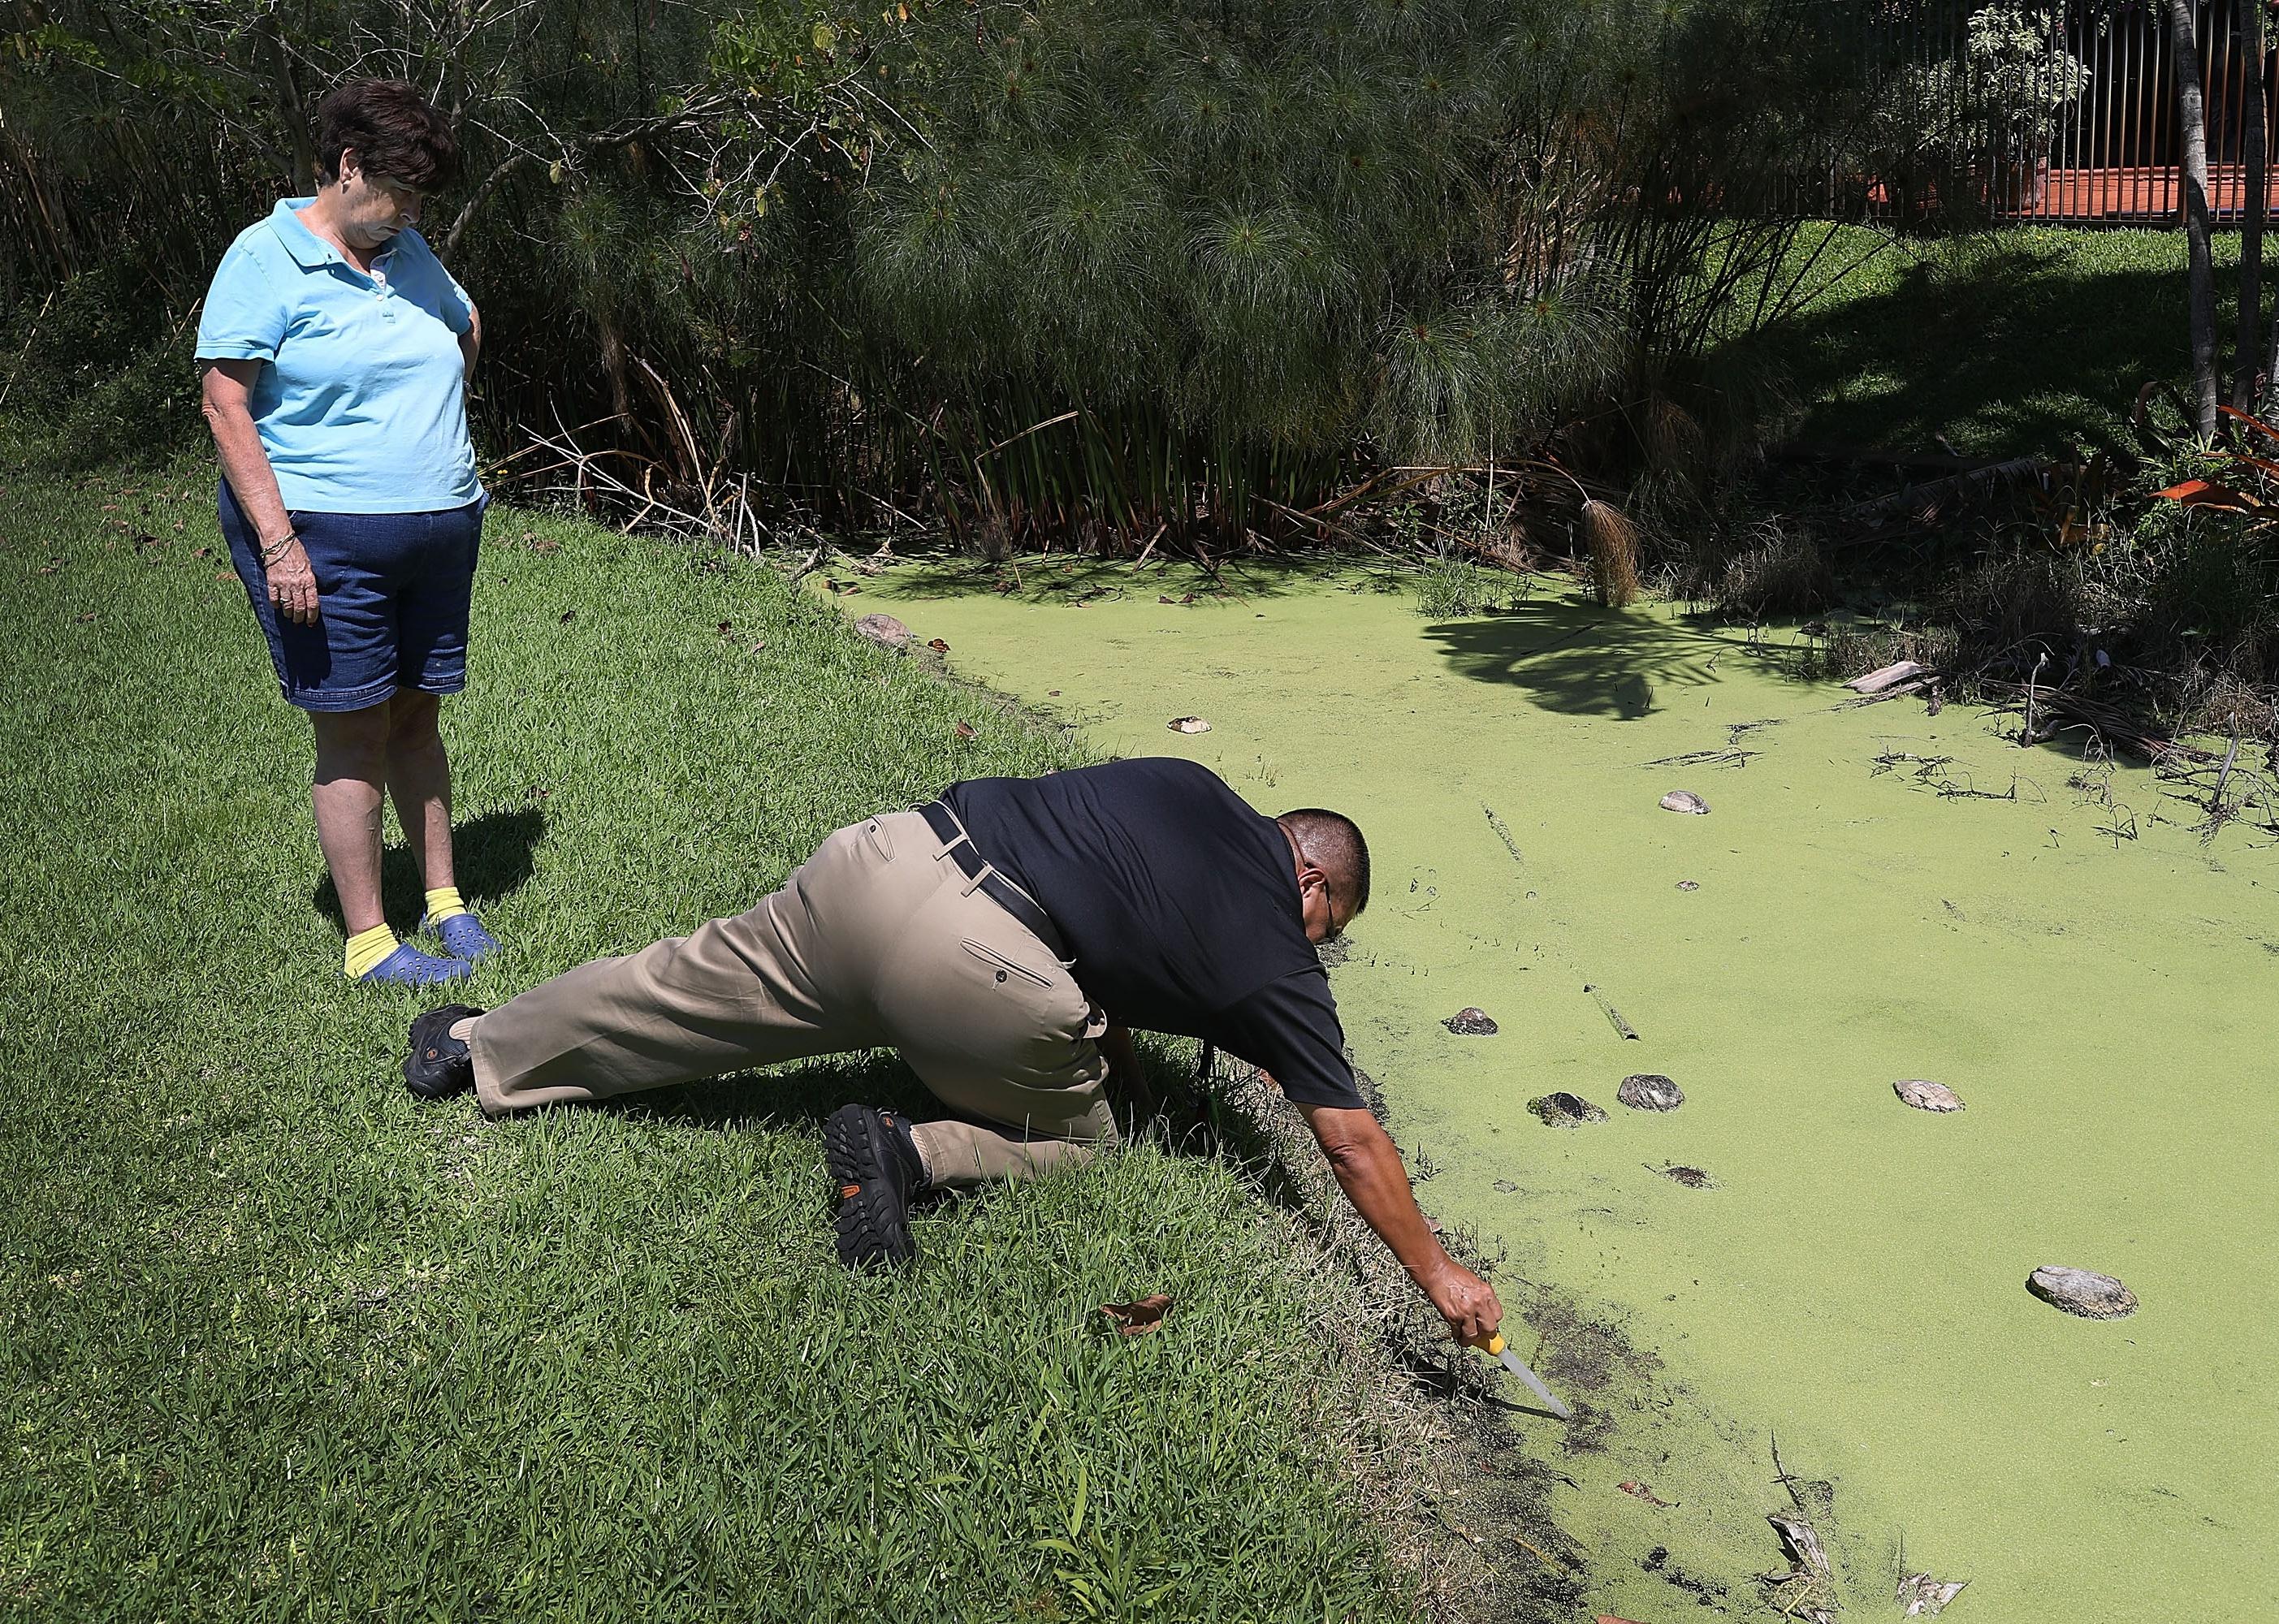 A woman watches as a mosquito control manager checks a green body of water.